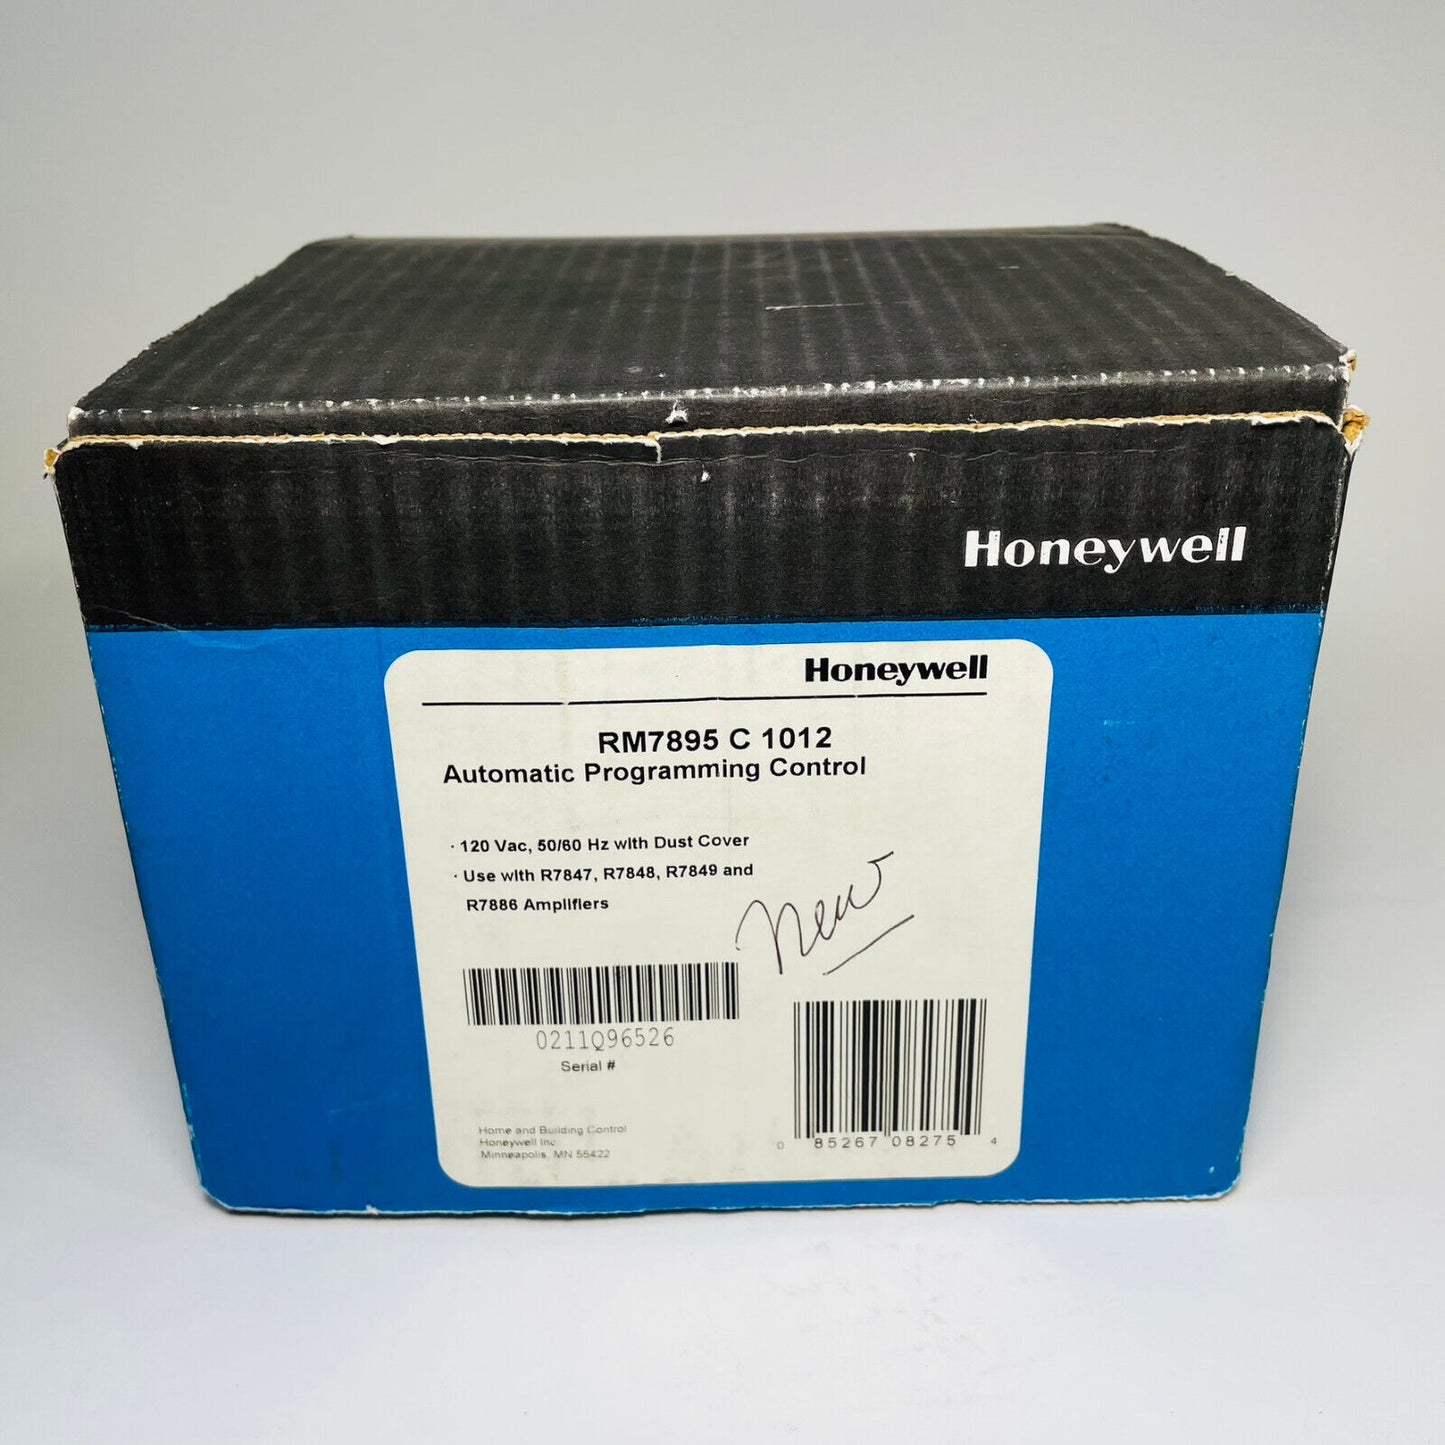 New Honeywell RM7895C1012 / RM7895 C 1012 , 120V Primary Control 4 Or 10 Sec